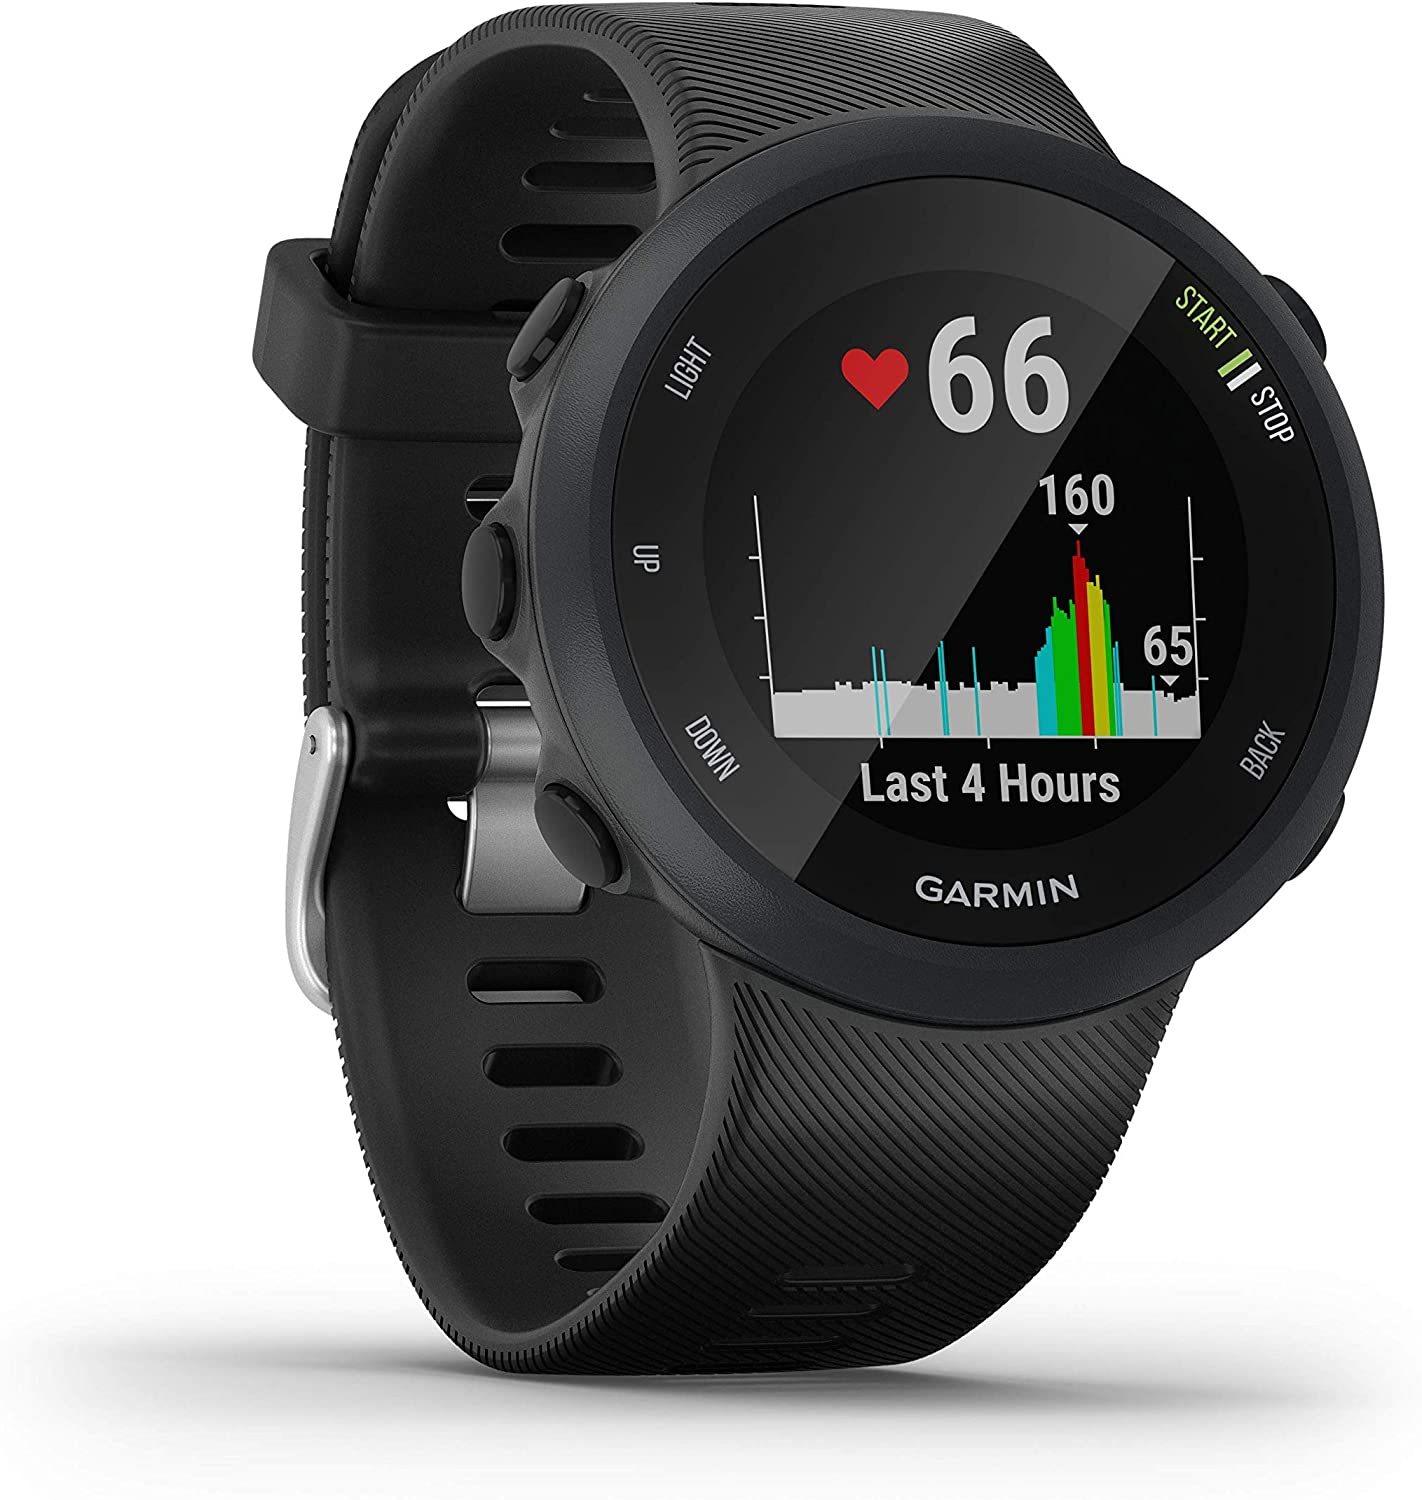 Garmin Forerunner 45 vs 55 - What are the differences?